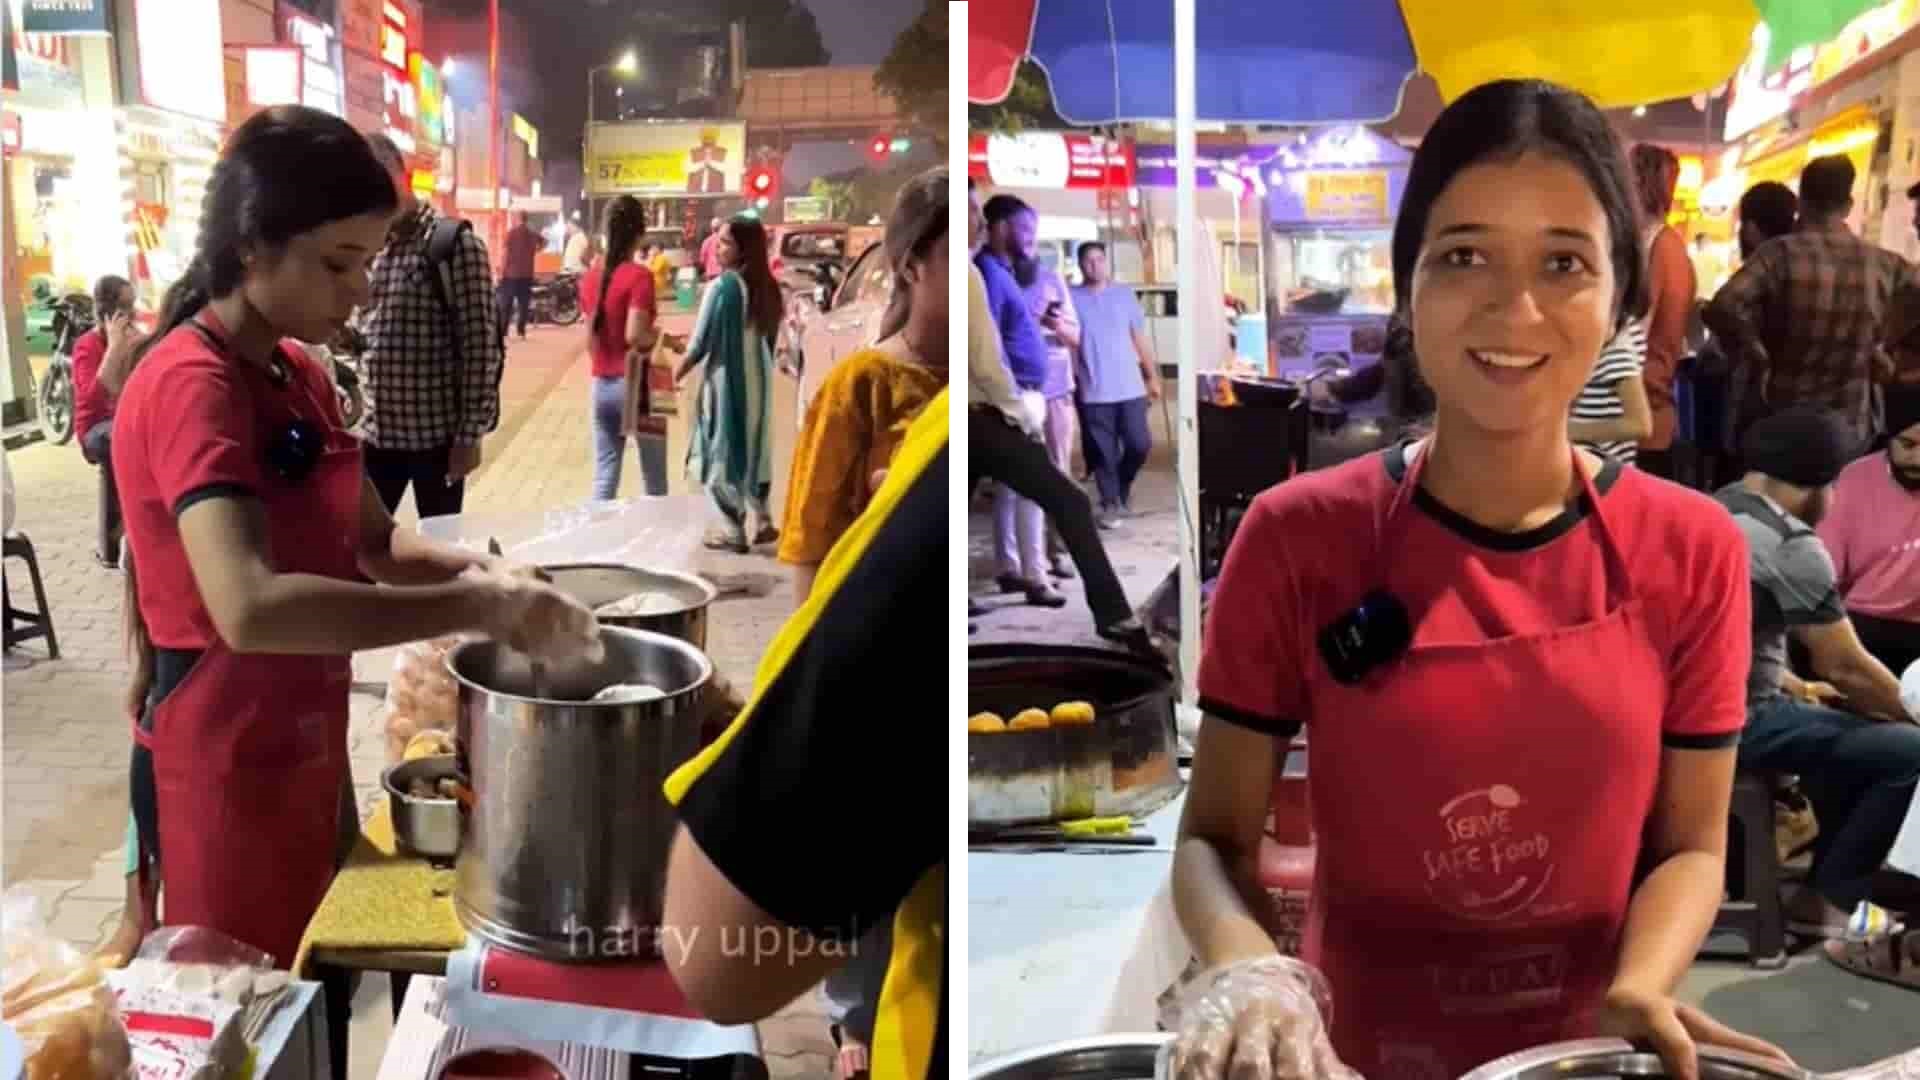 Inspirational: This Girl From Punjab Runs Food Stall And Sells Pani Puri To Support Her Education